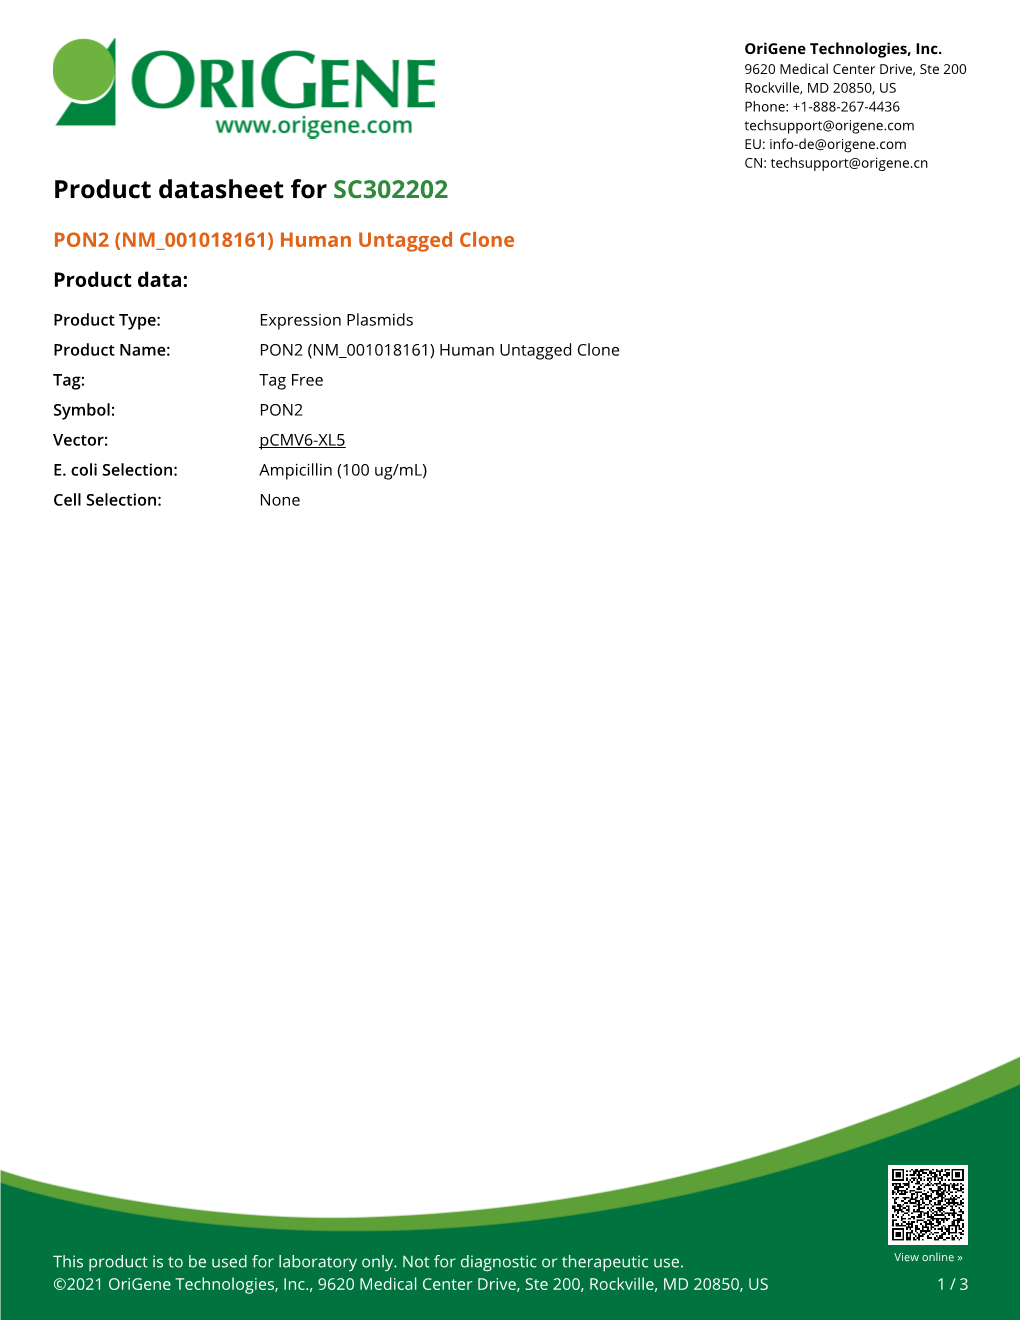 PON2 (NM 001018161) Human Untagged Clone Product Data